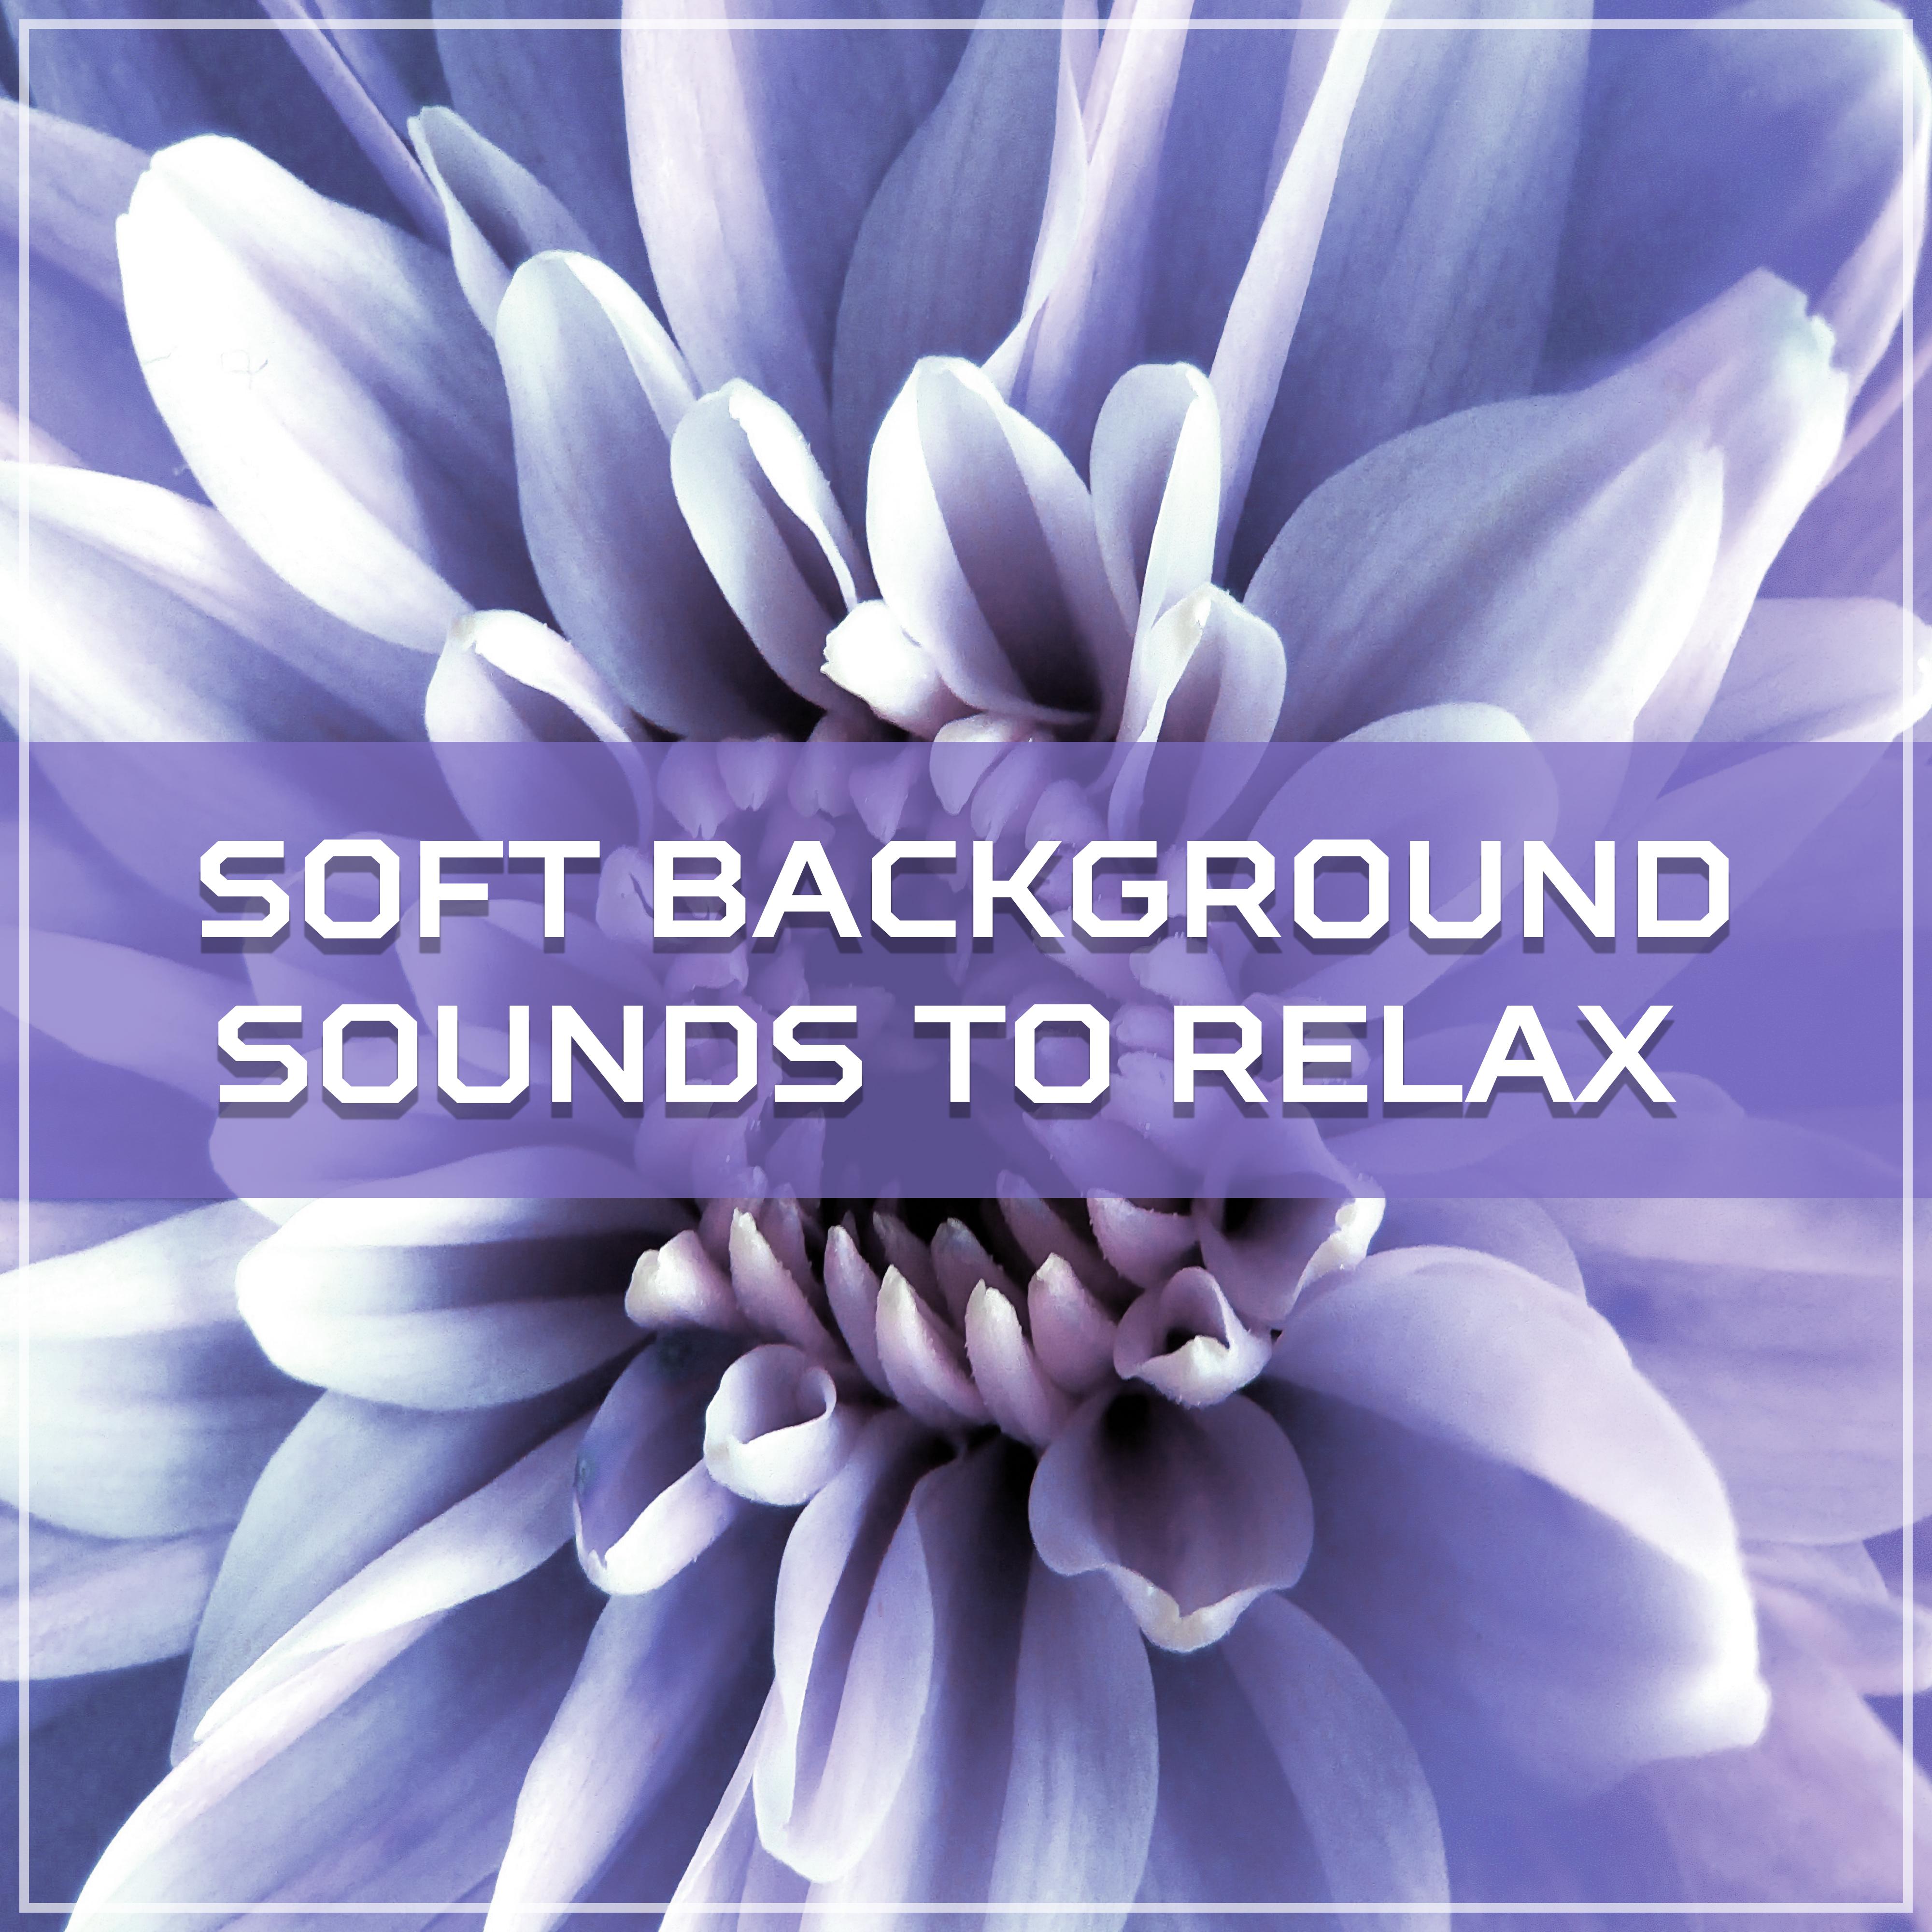 Soft Background Sounds to Relax – New Age Relaxation, Inner Harmony, Spirit Free, Stress Relief